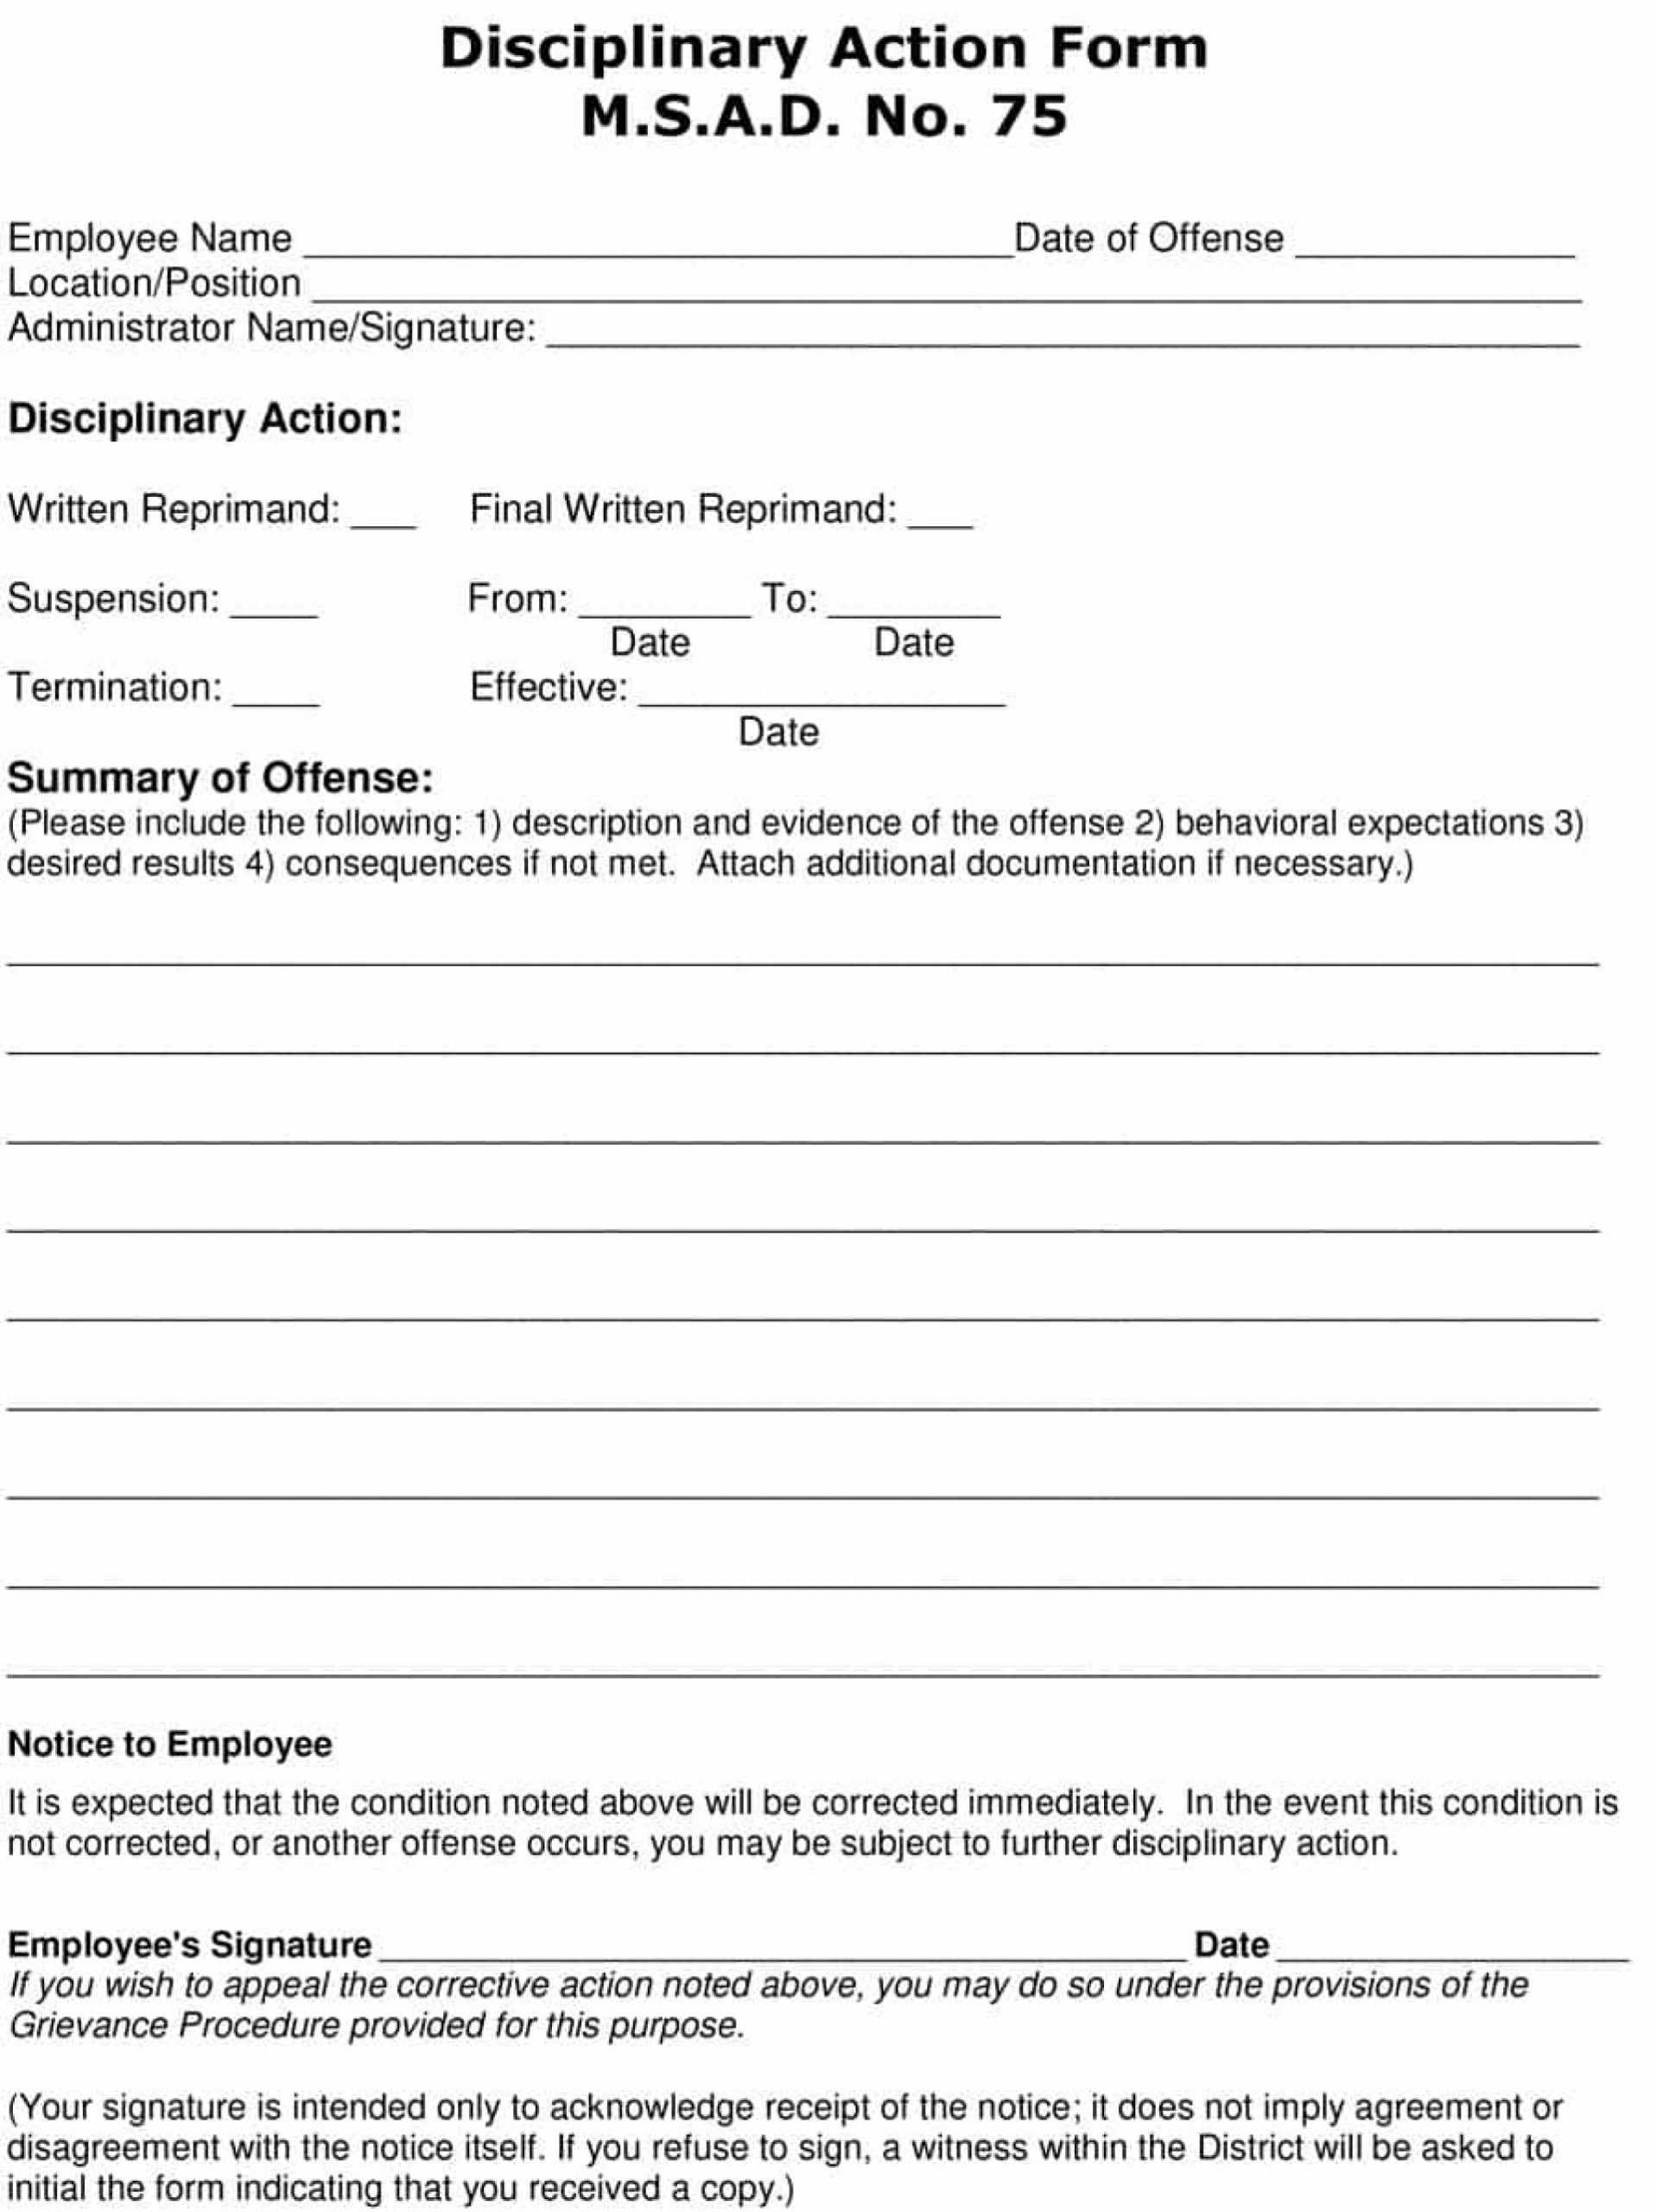 Employee Write Up Form Free Printable Disciplinary Forms In Book Report Template In Spanish